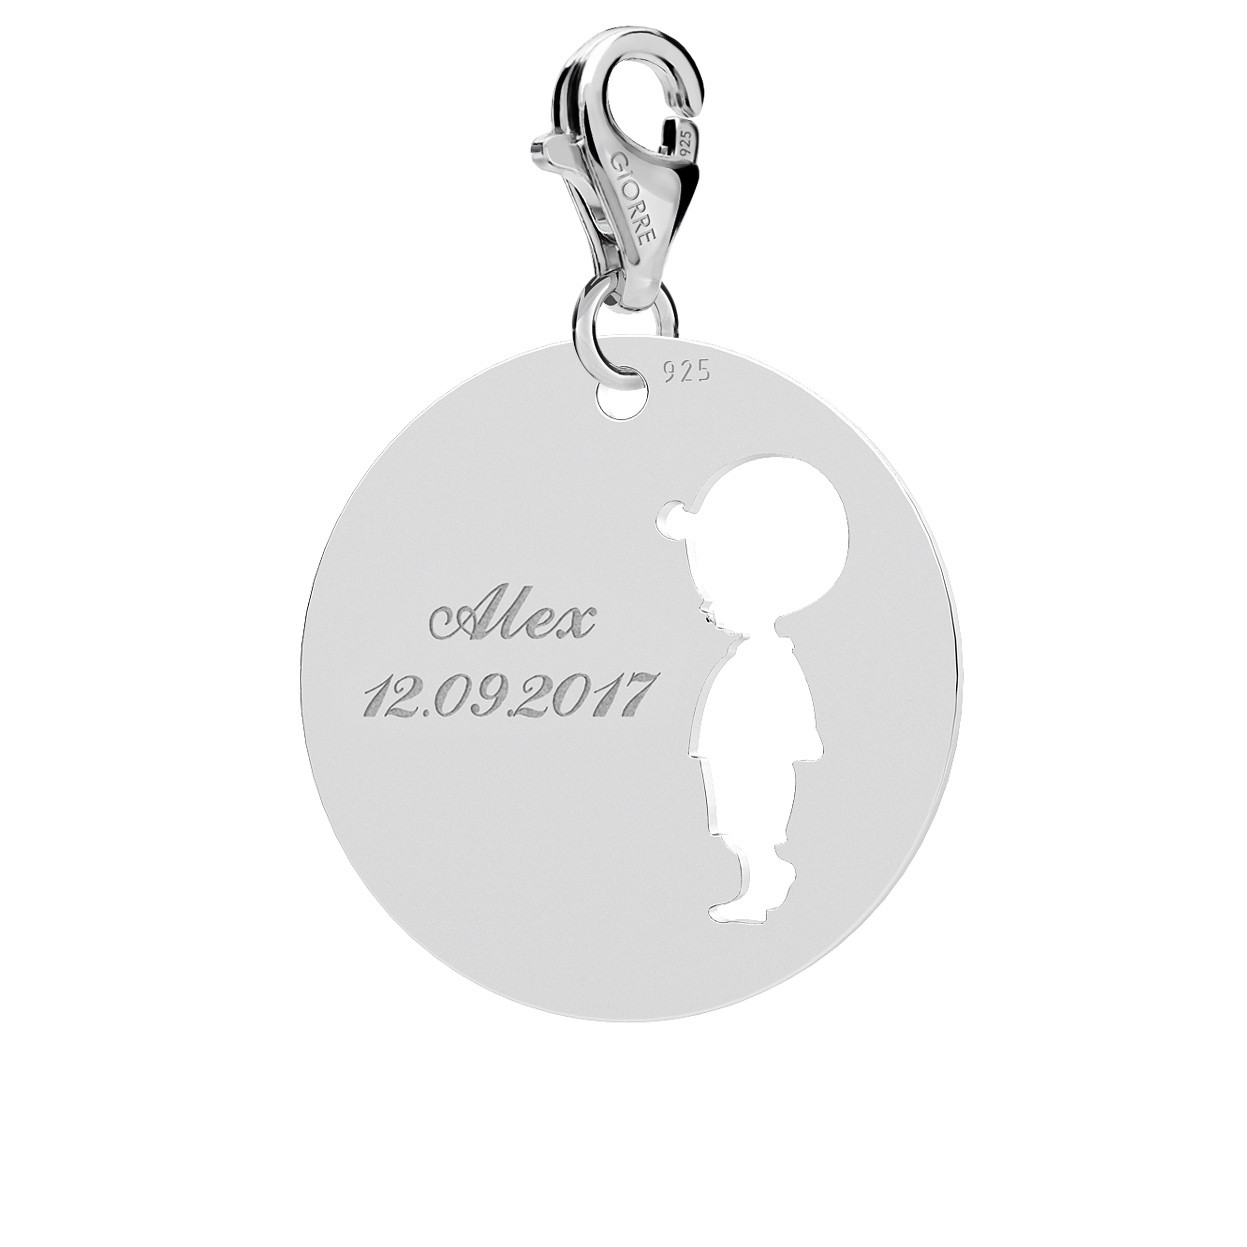 BOY CHARMS WITH ENGRAVING, STERLING SILVER 925